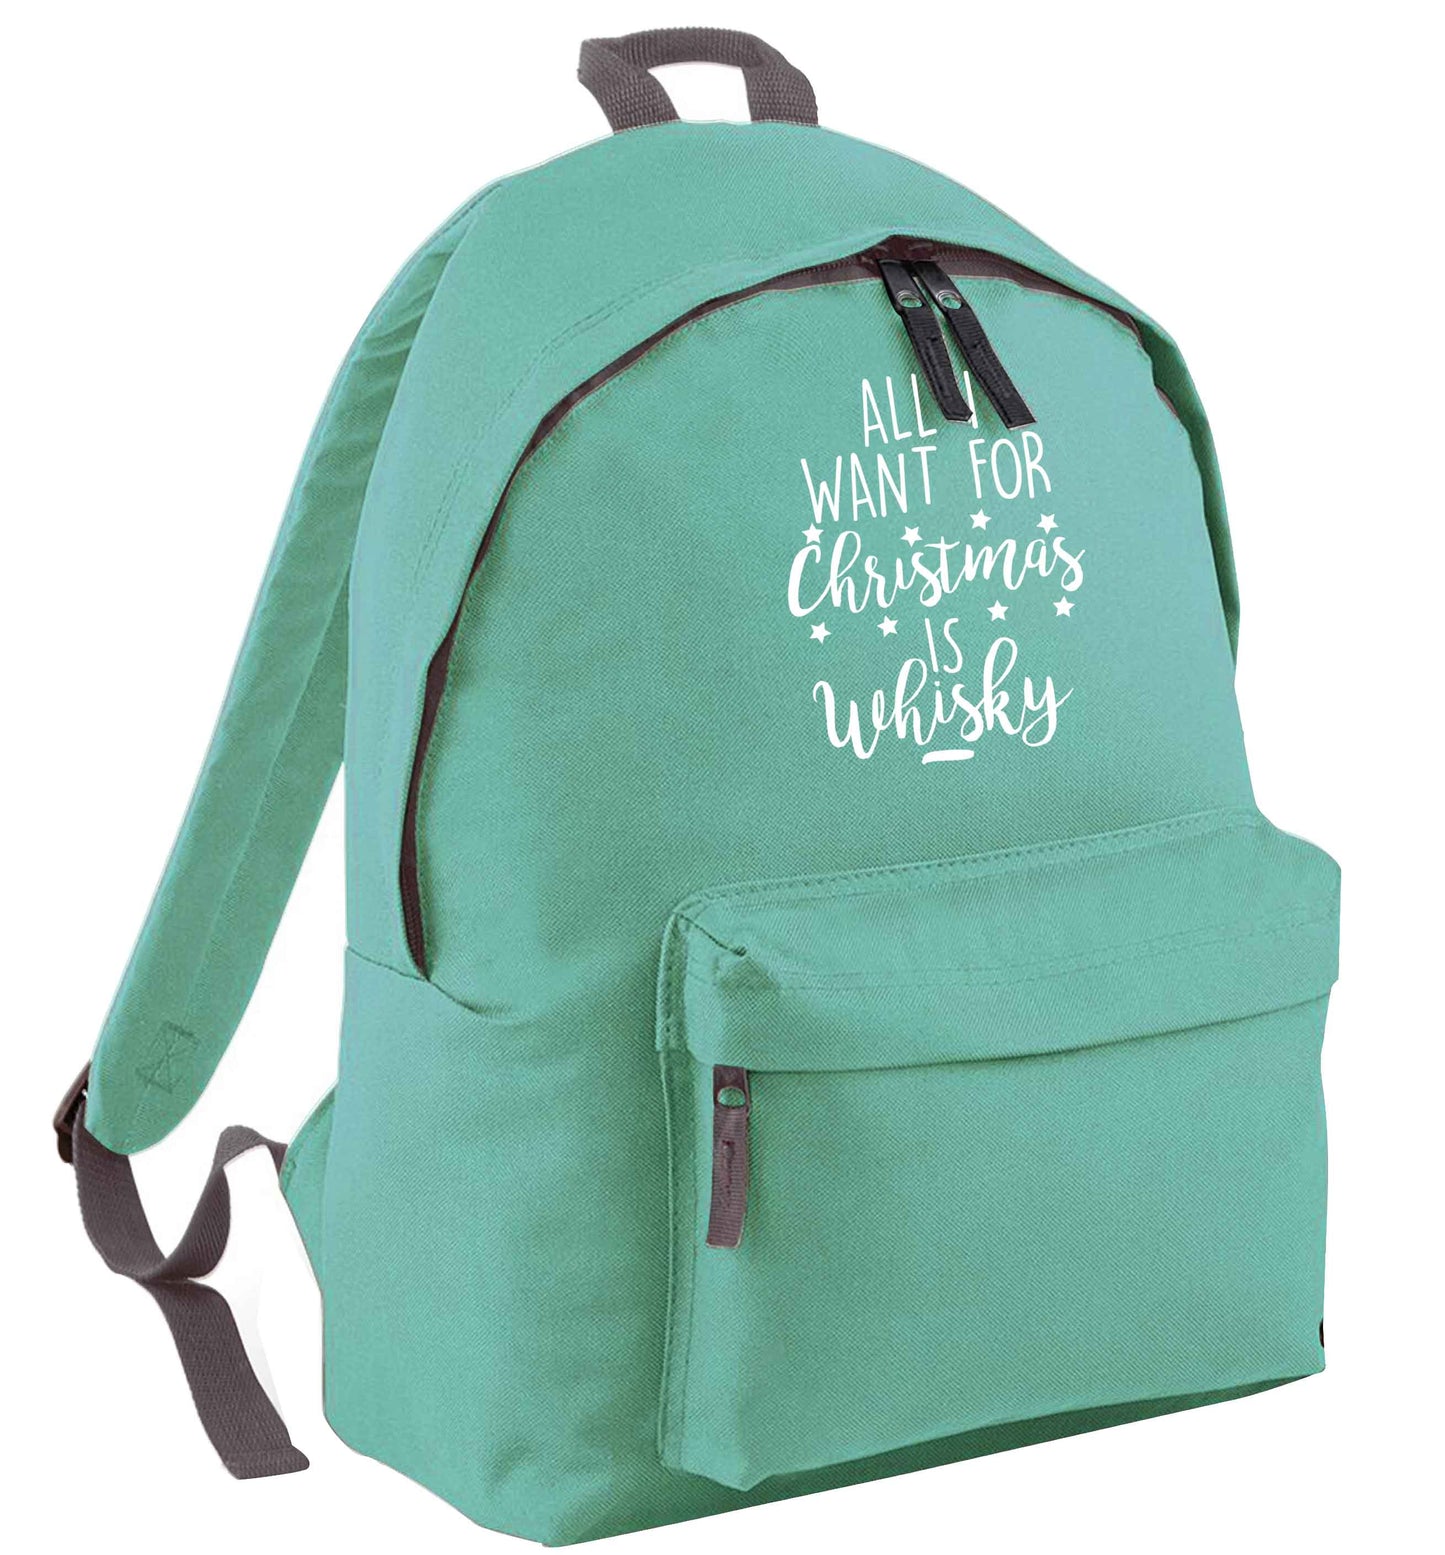 All I want for Christmas is whisky mint adults backpack